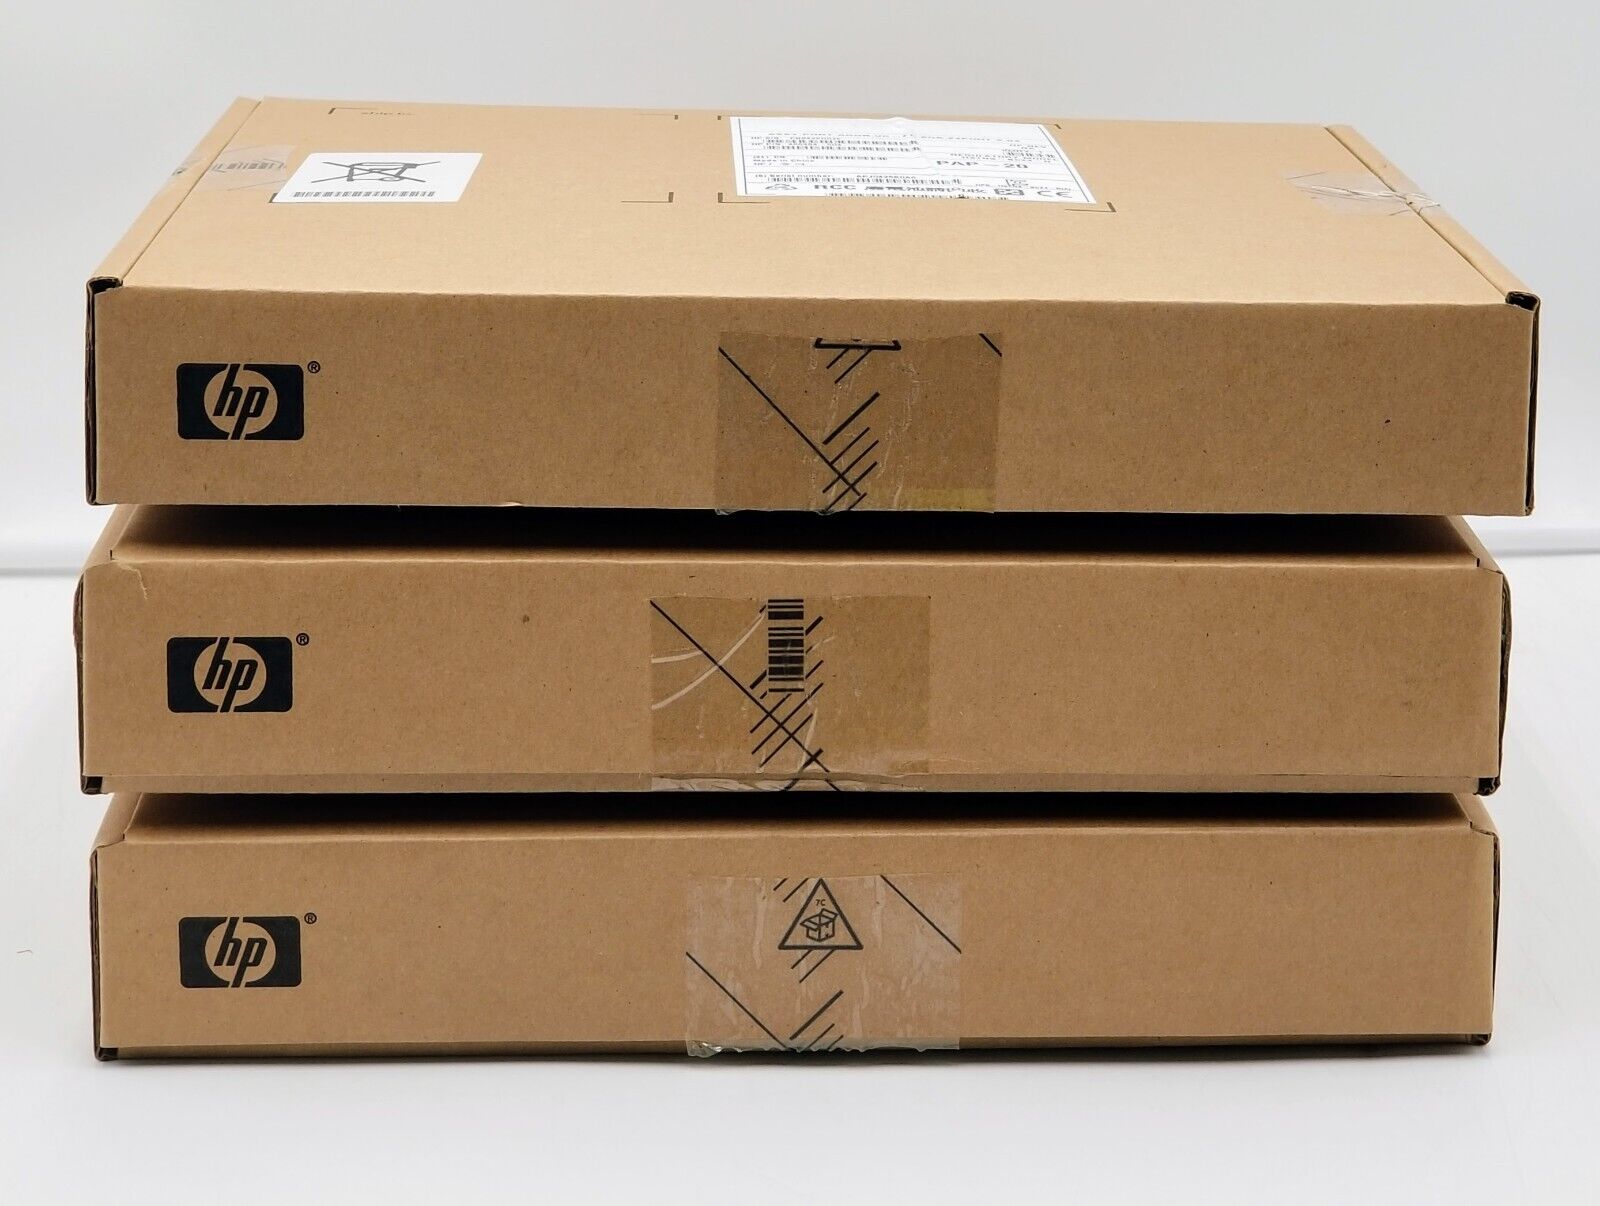 LOT OF (3) HP Virtual Connect 4GB Fibre Channel FC Switch SBCBV24164-11G